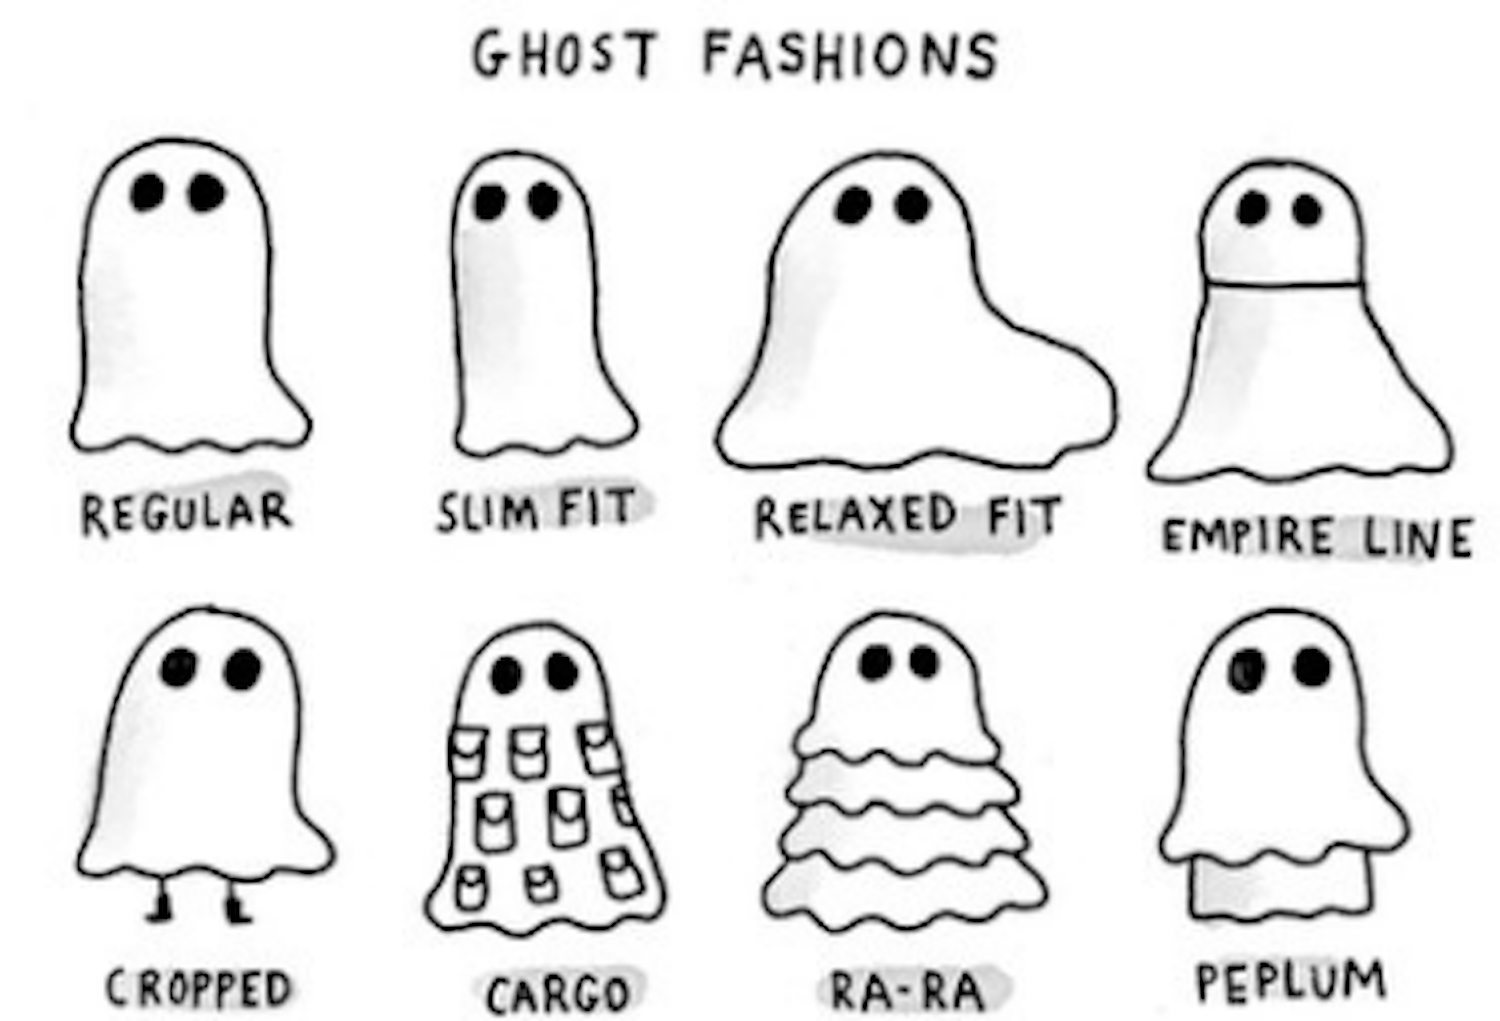 This ghost fashion guide proves ghouls are just like the rest of us